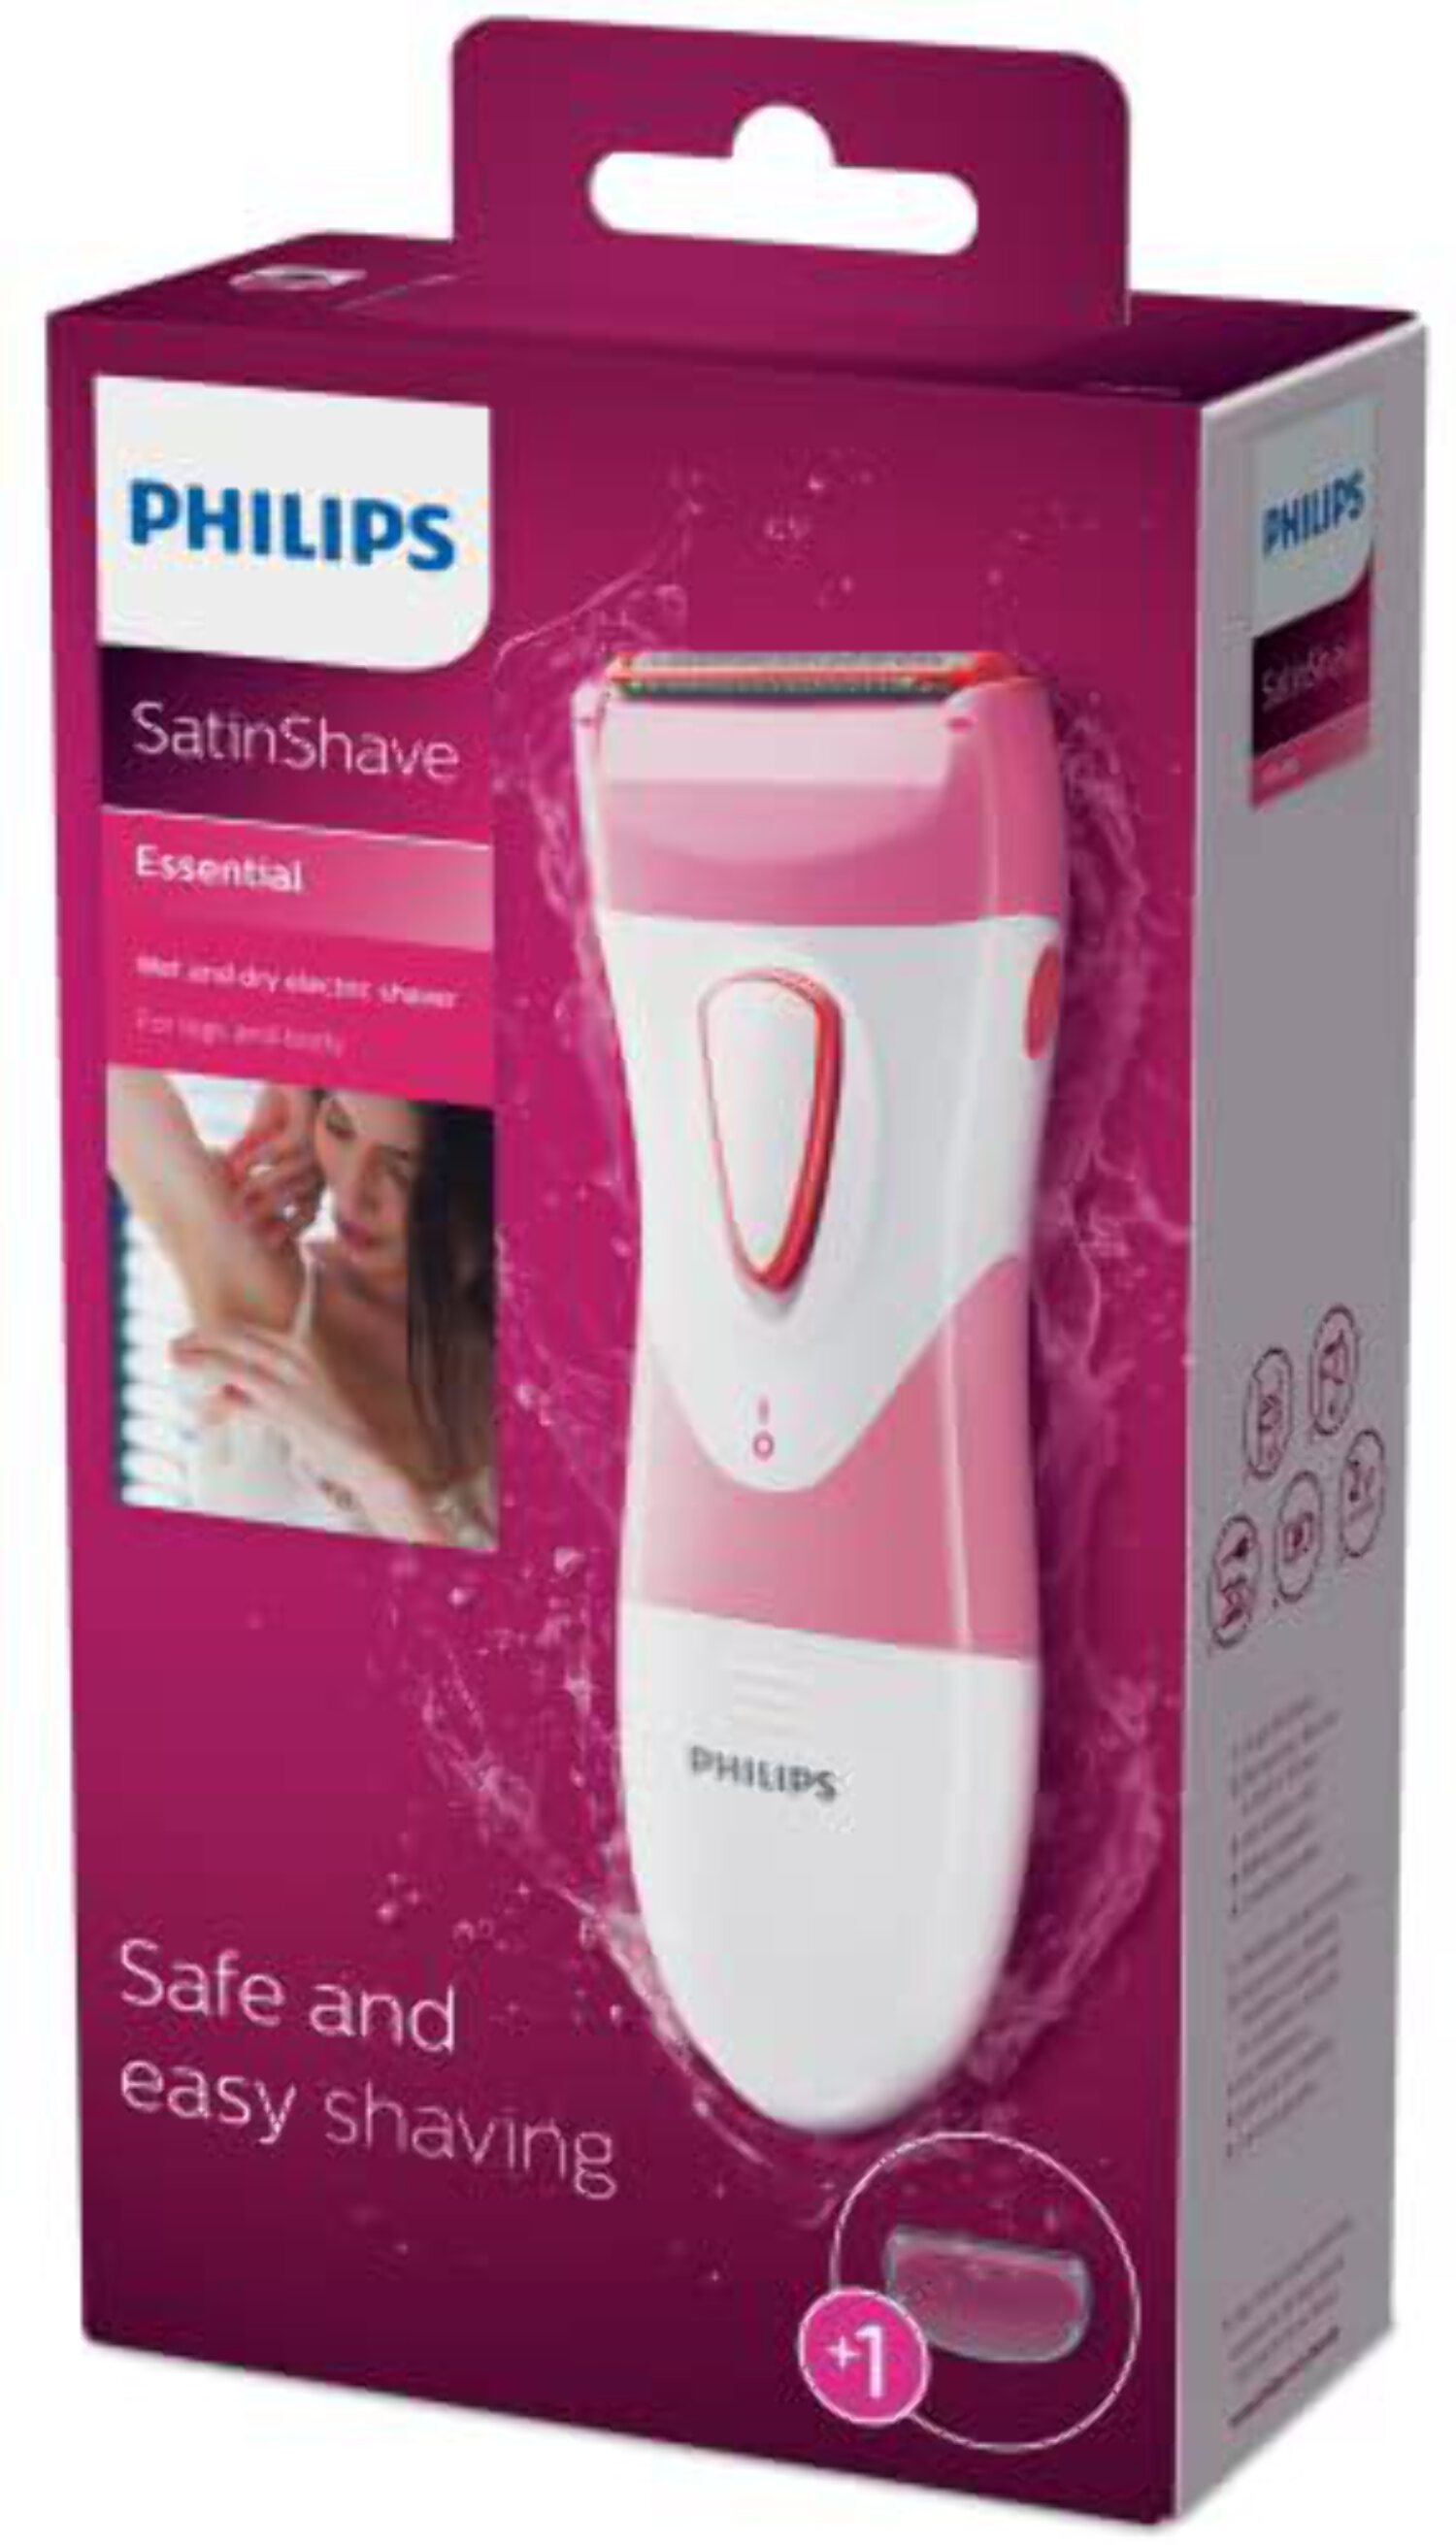 Philips SatinShave Essential Women's Electric Shaver for Legs, Cordless Wet and Dry Use (HP6306) - image 2 of 7